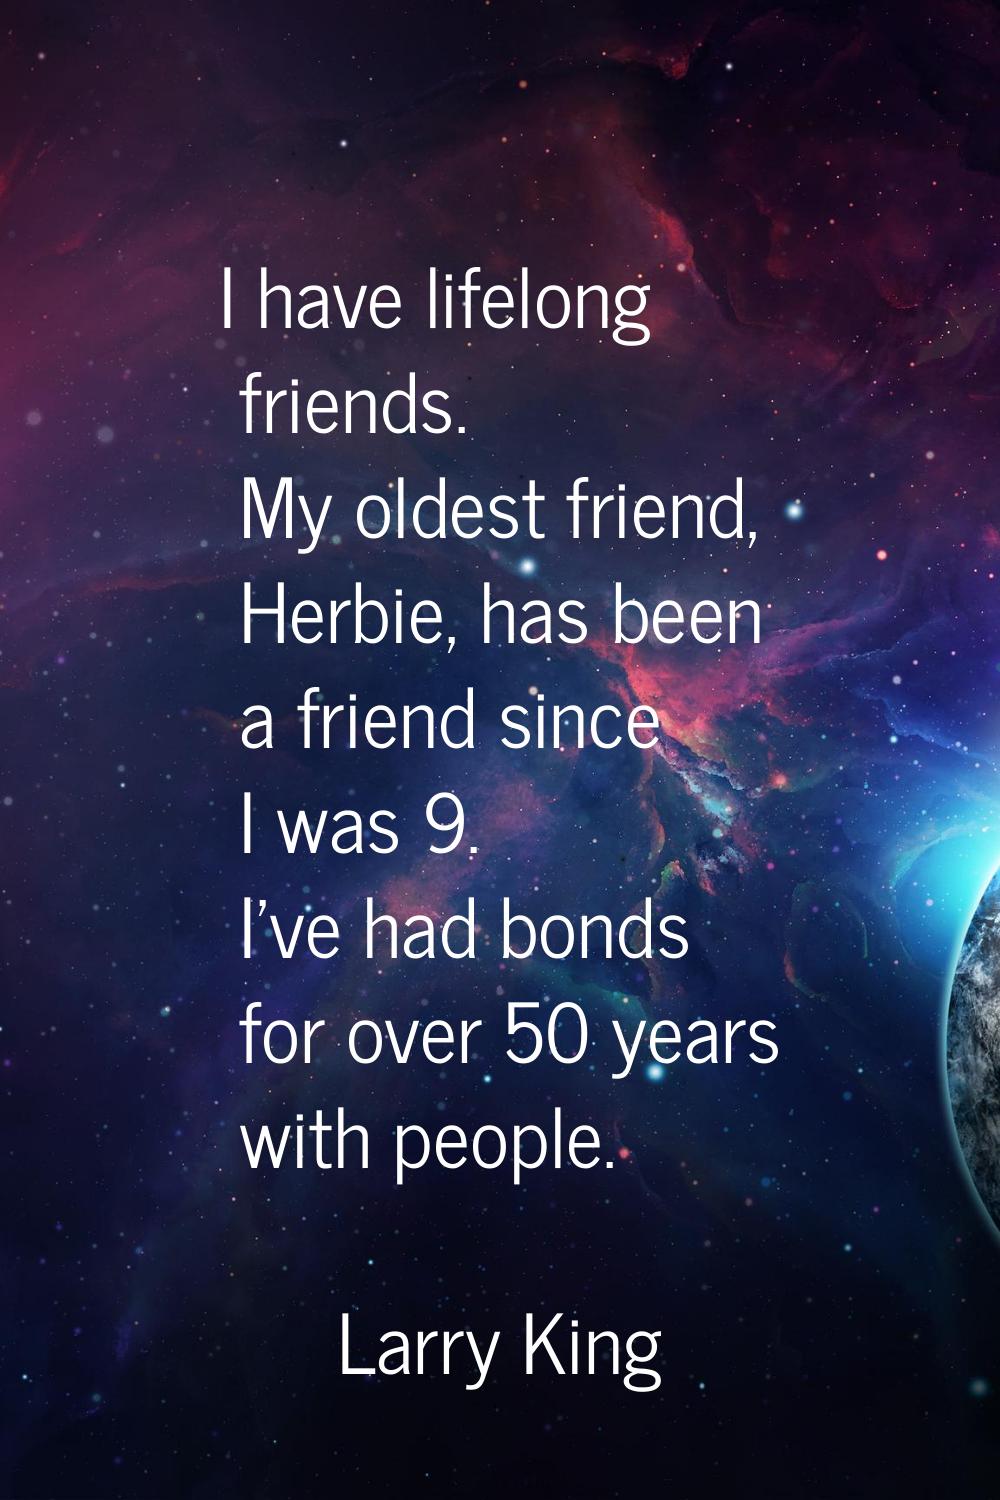 I have lifelong friends. My oldest friend, Herbie, has been a friend since I was 9. I've had bonds 